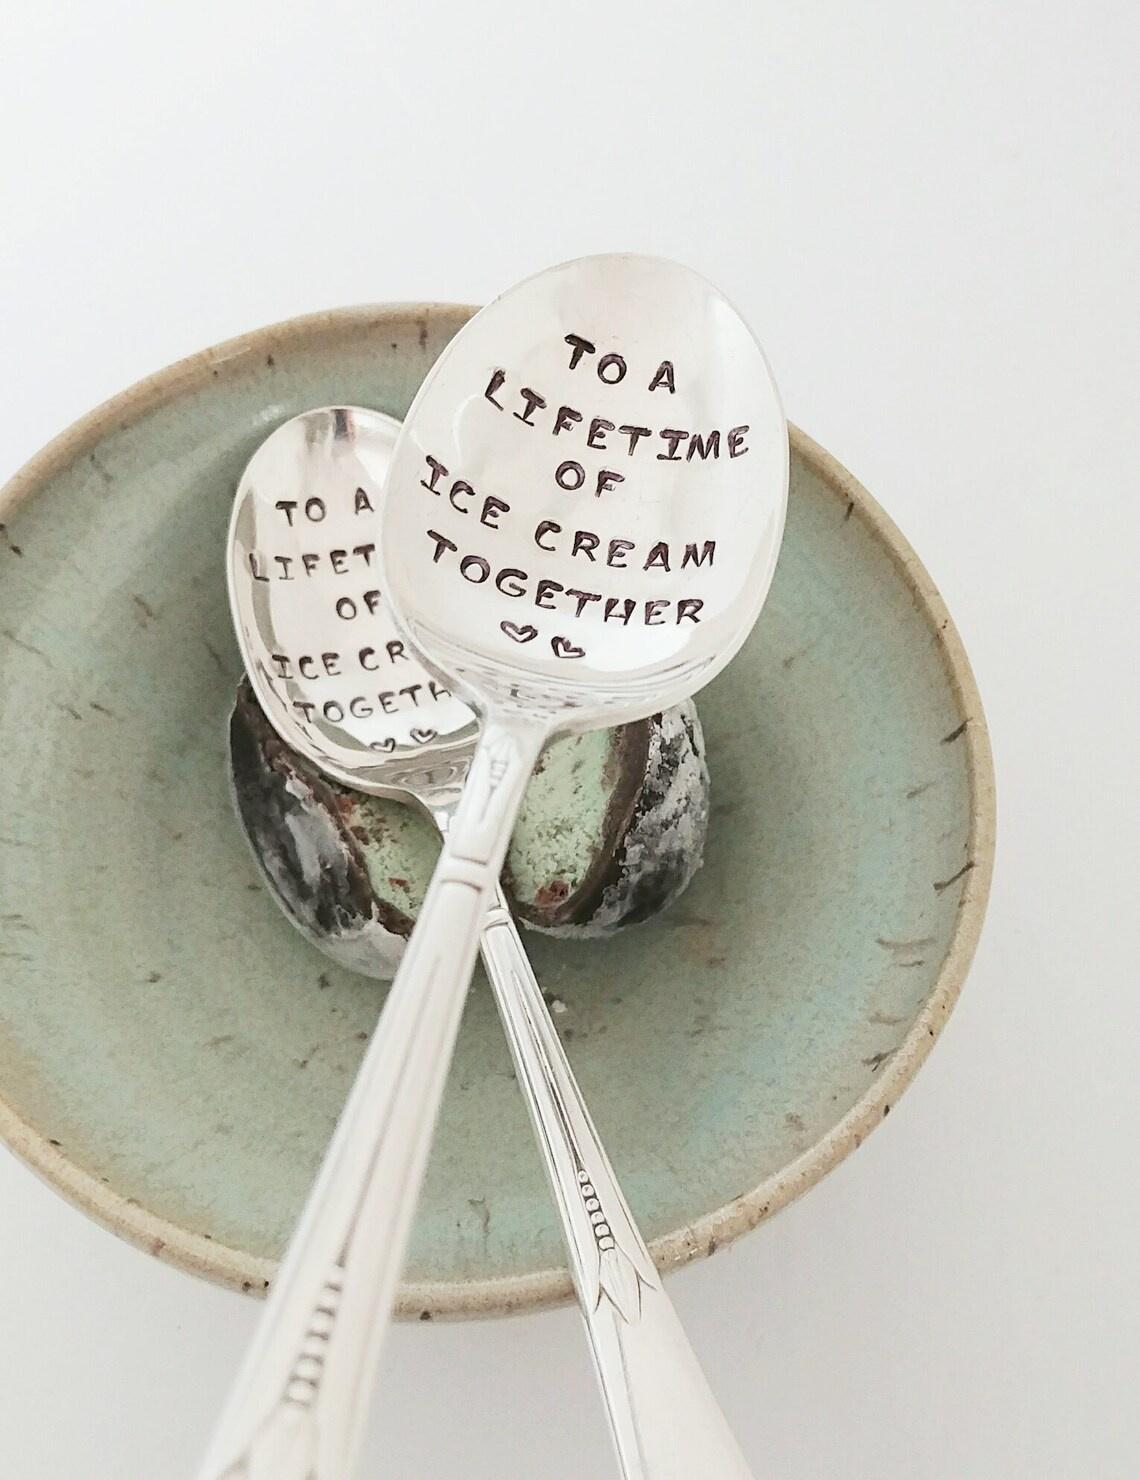 To a Lifetime of Ice Cream Together spoons fifth anniversary modern gift